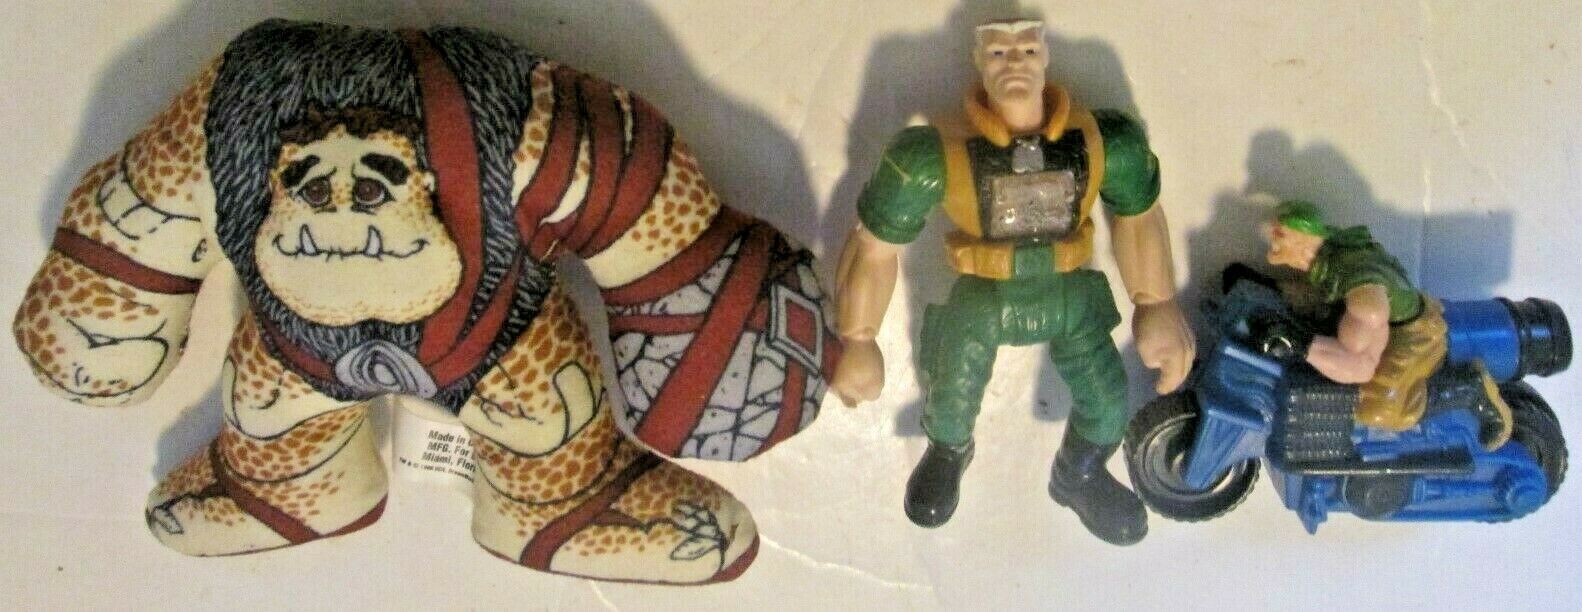 Vintage 1998 Burger King Small Soldiers 3 Toys With Plush Slamfist Toy